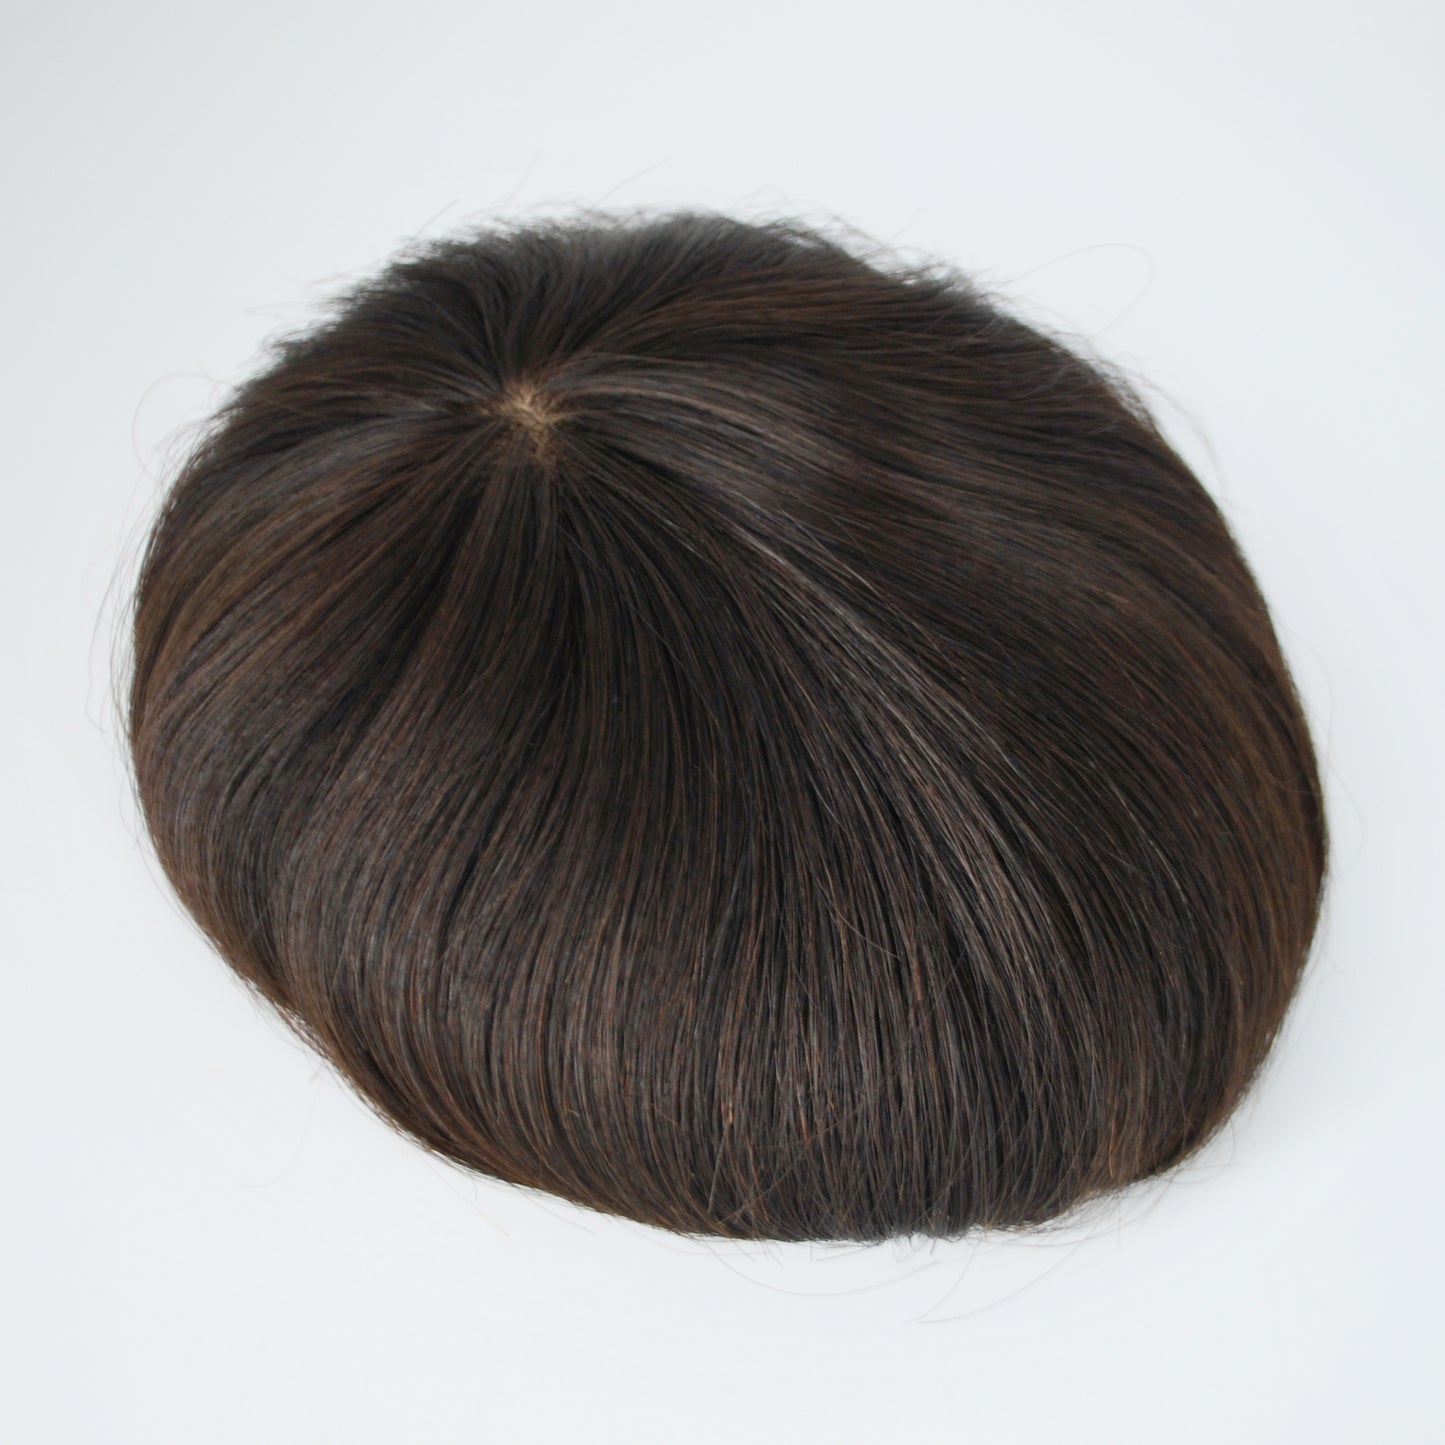 Clearance human hair toupee natural black 7x6.5" prosthesis for men French lace with PU around